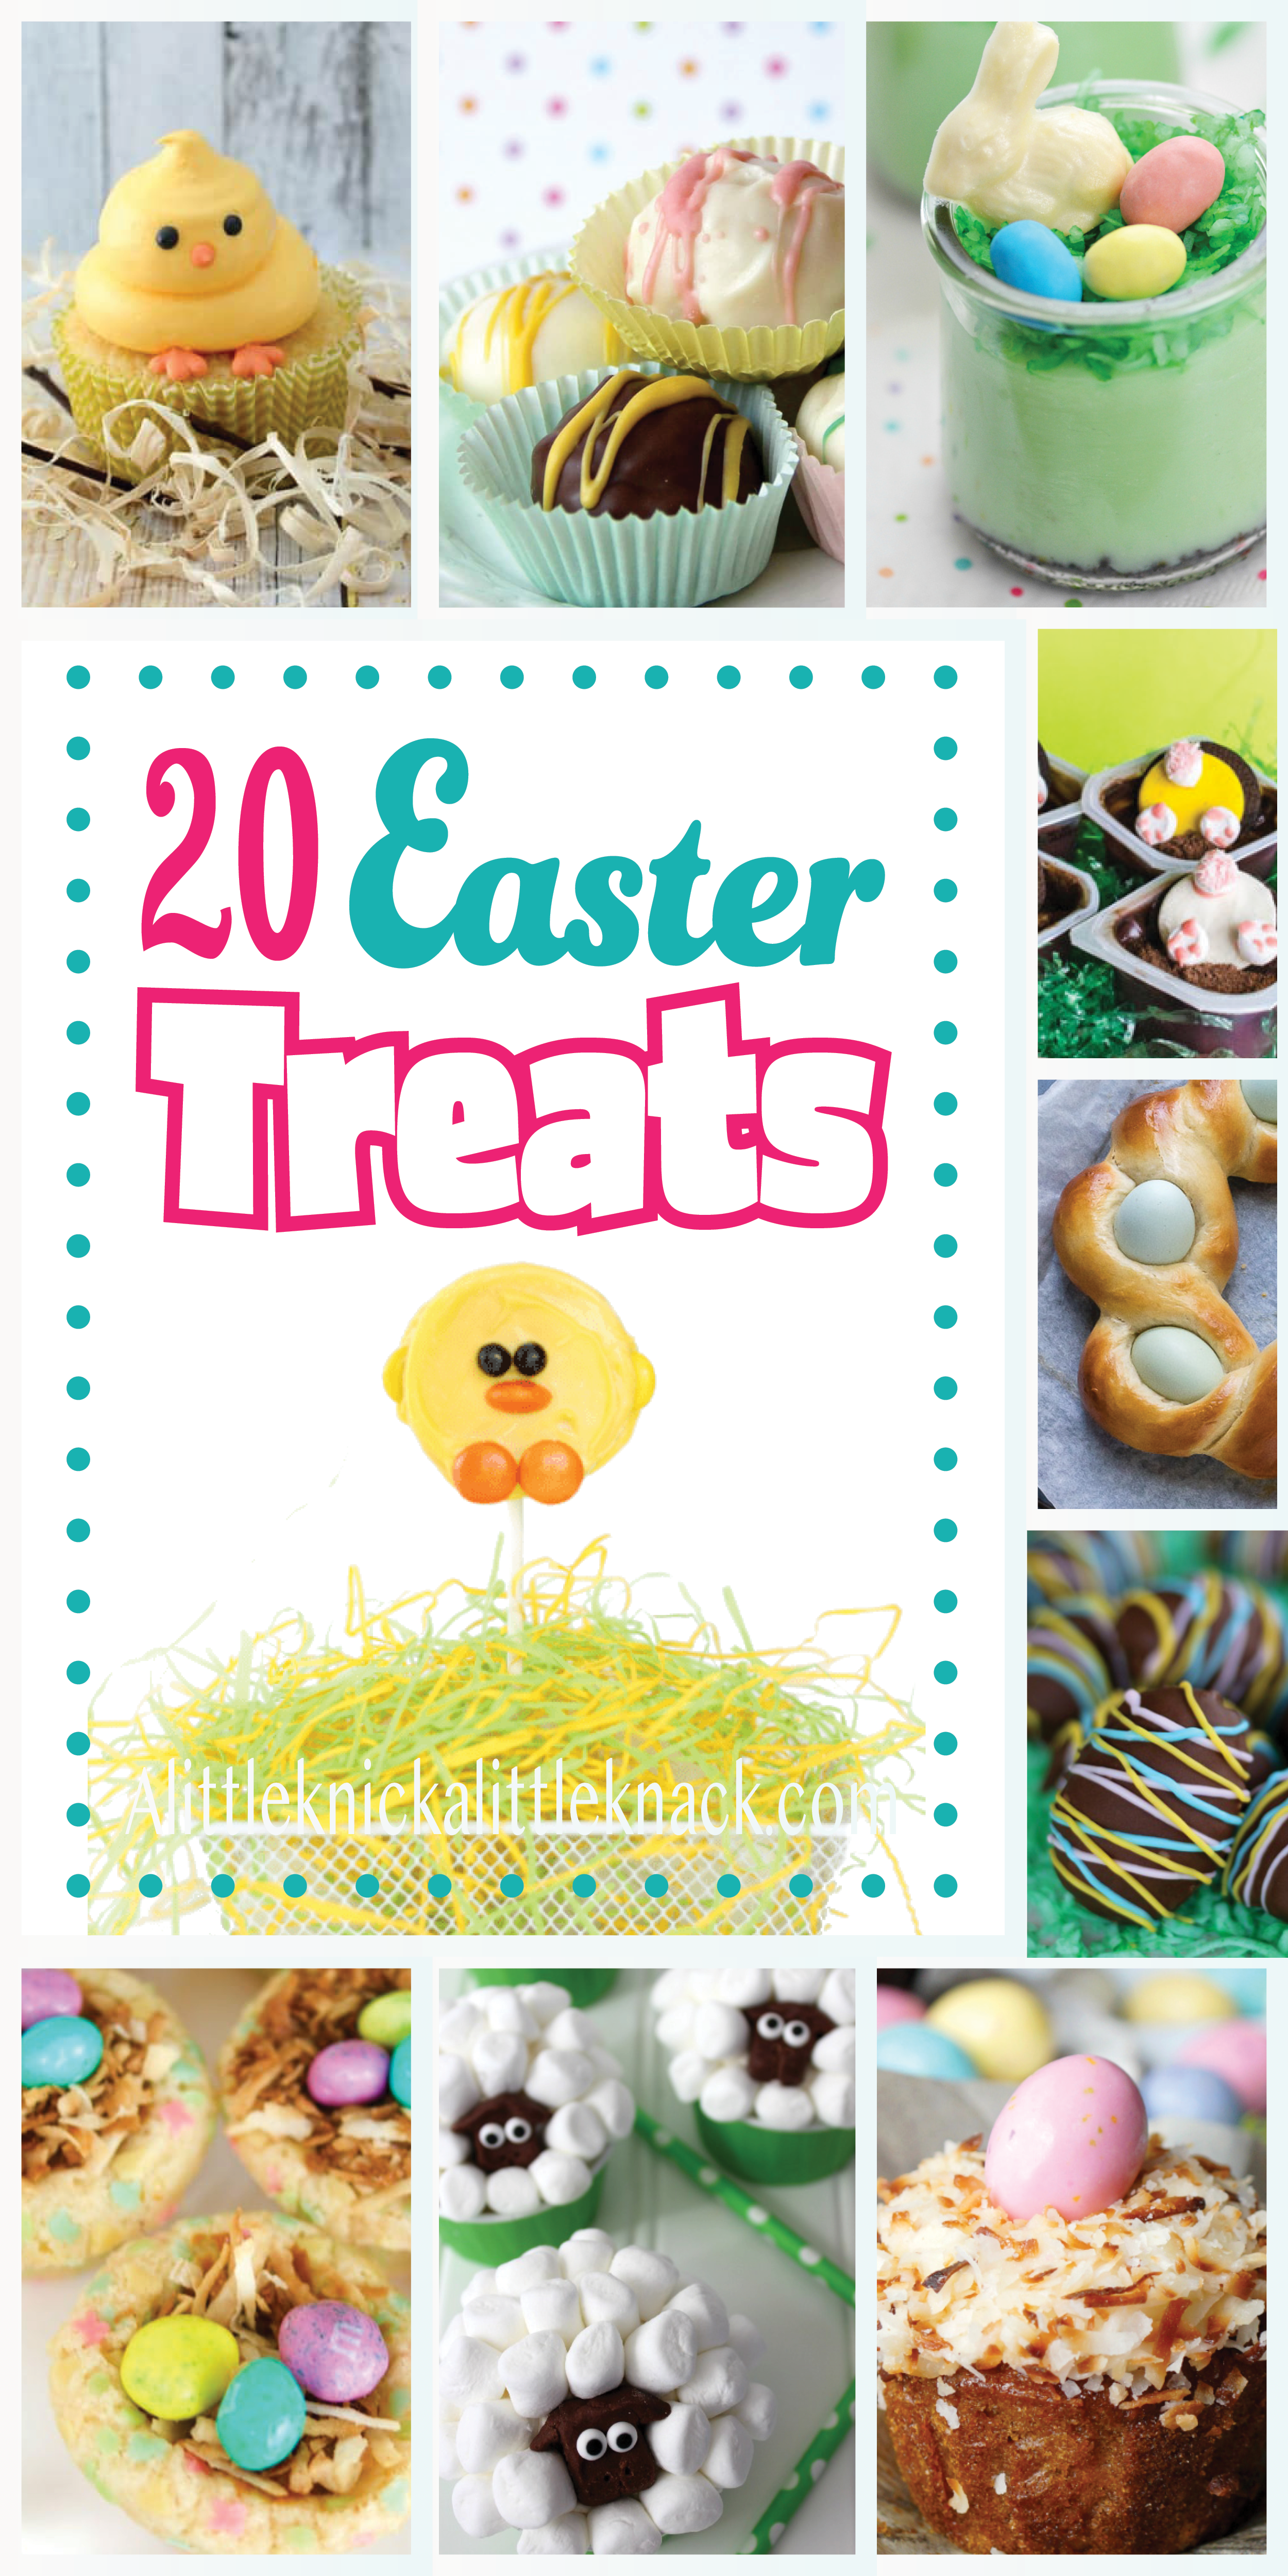 Collage of 10 different easter desserts with text overlay